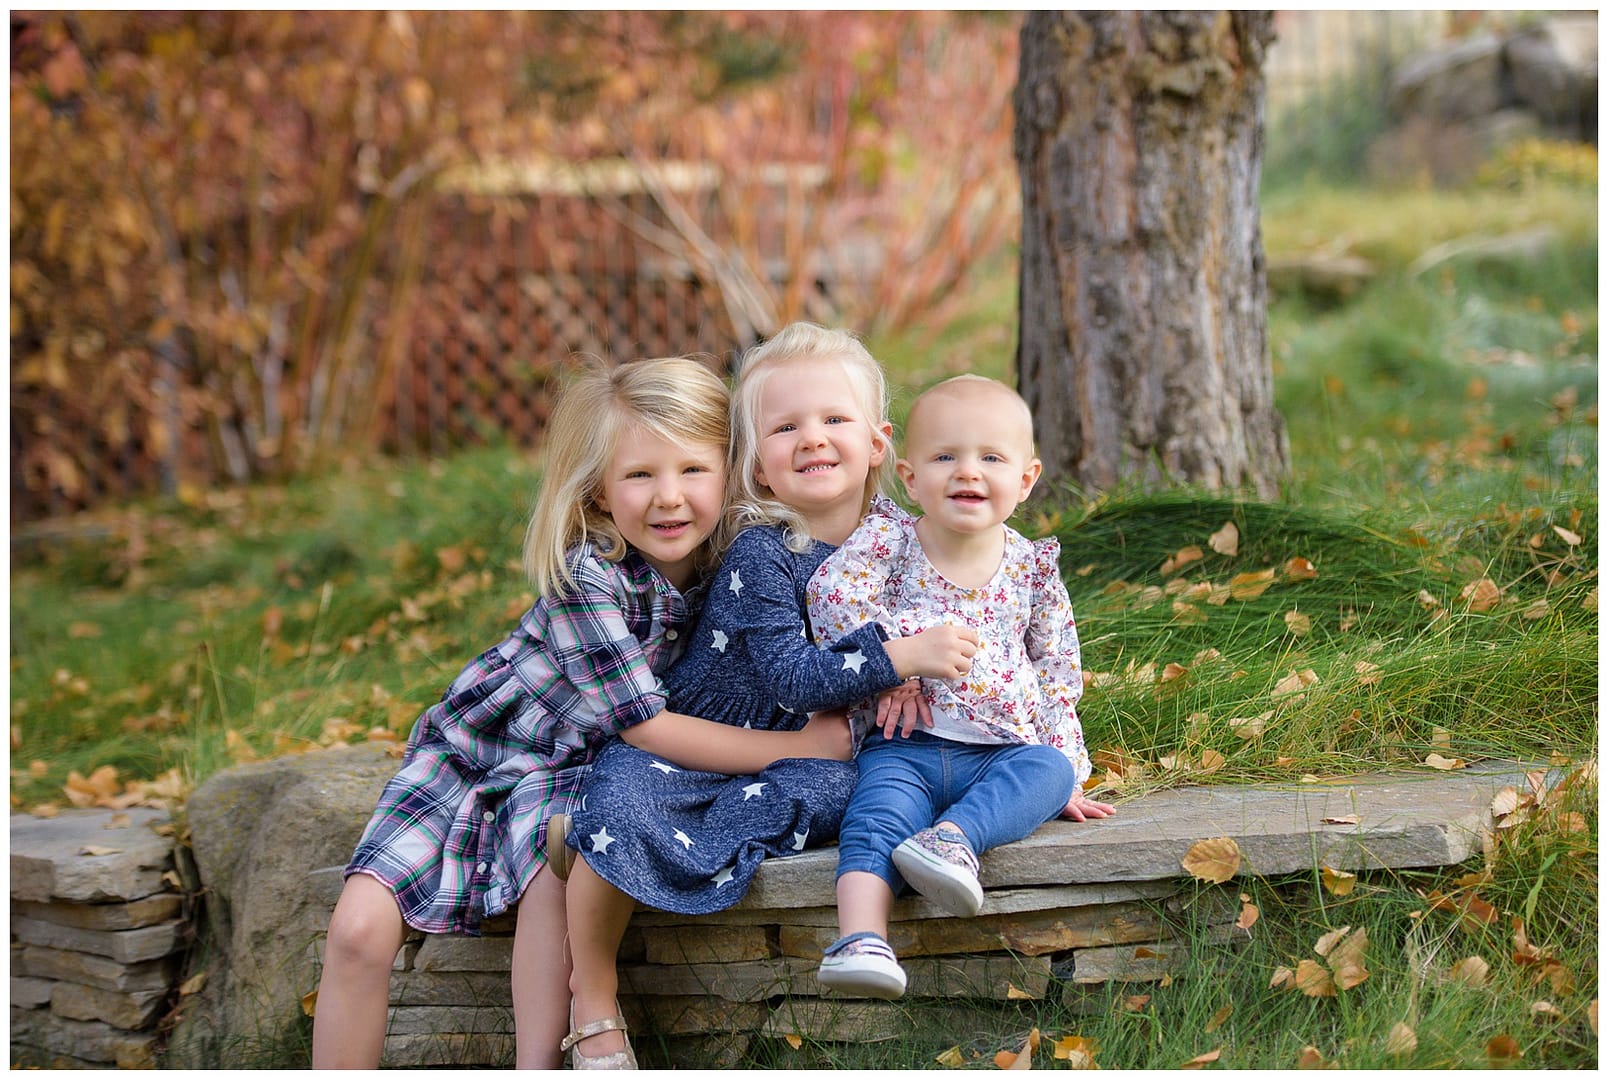 North End Boise Family Photos_Three sisters smile in backyard_Photo by Tiffany Hix Photography.jpg